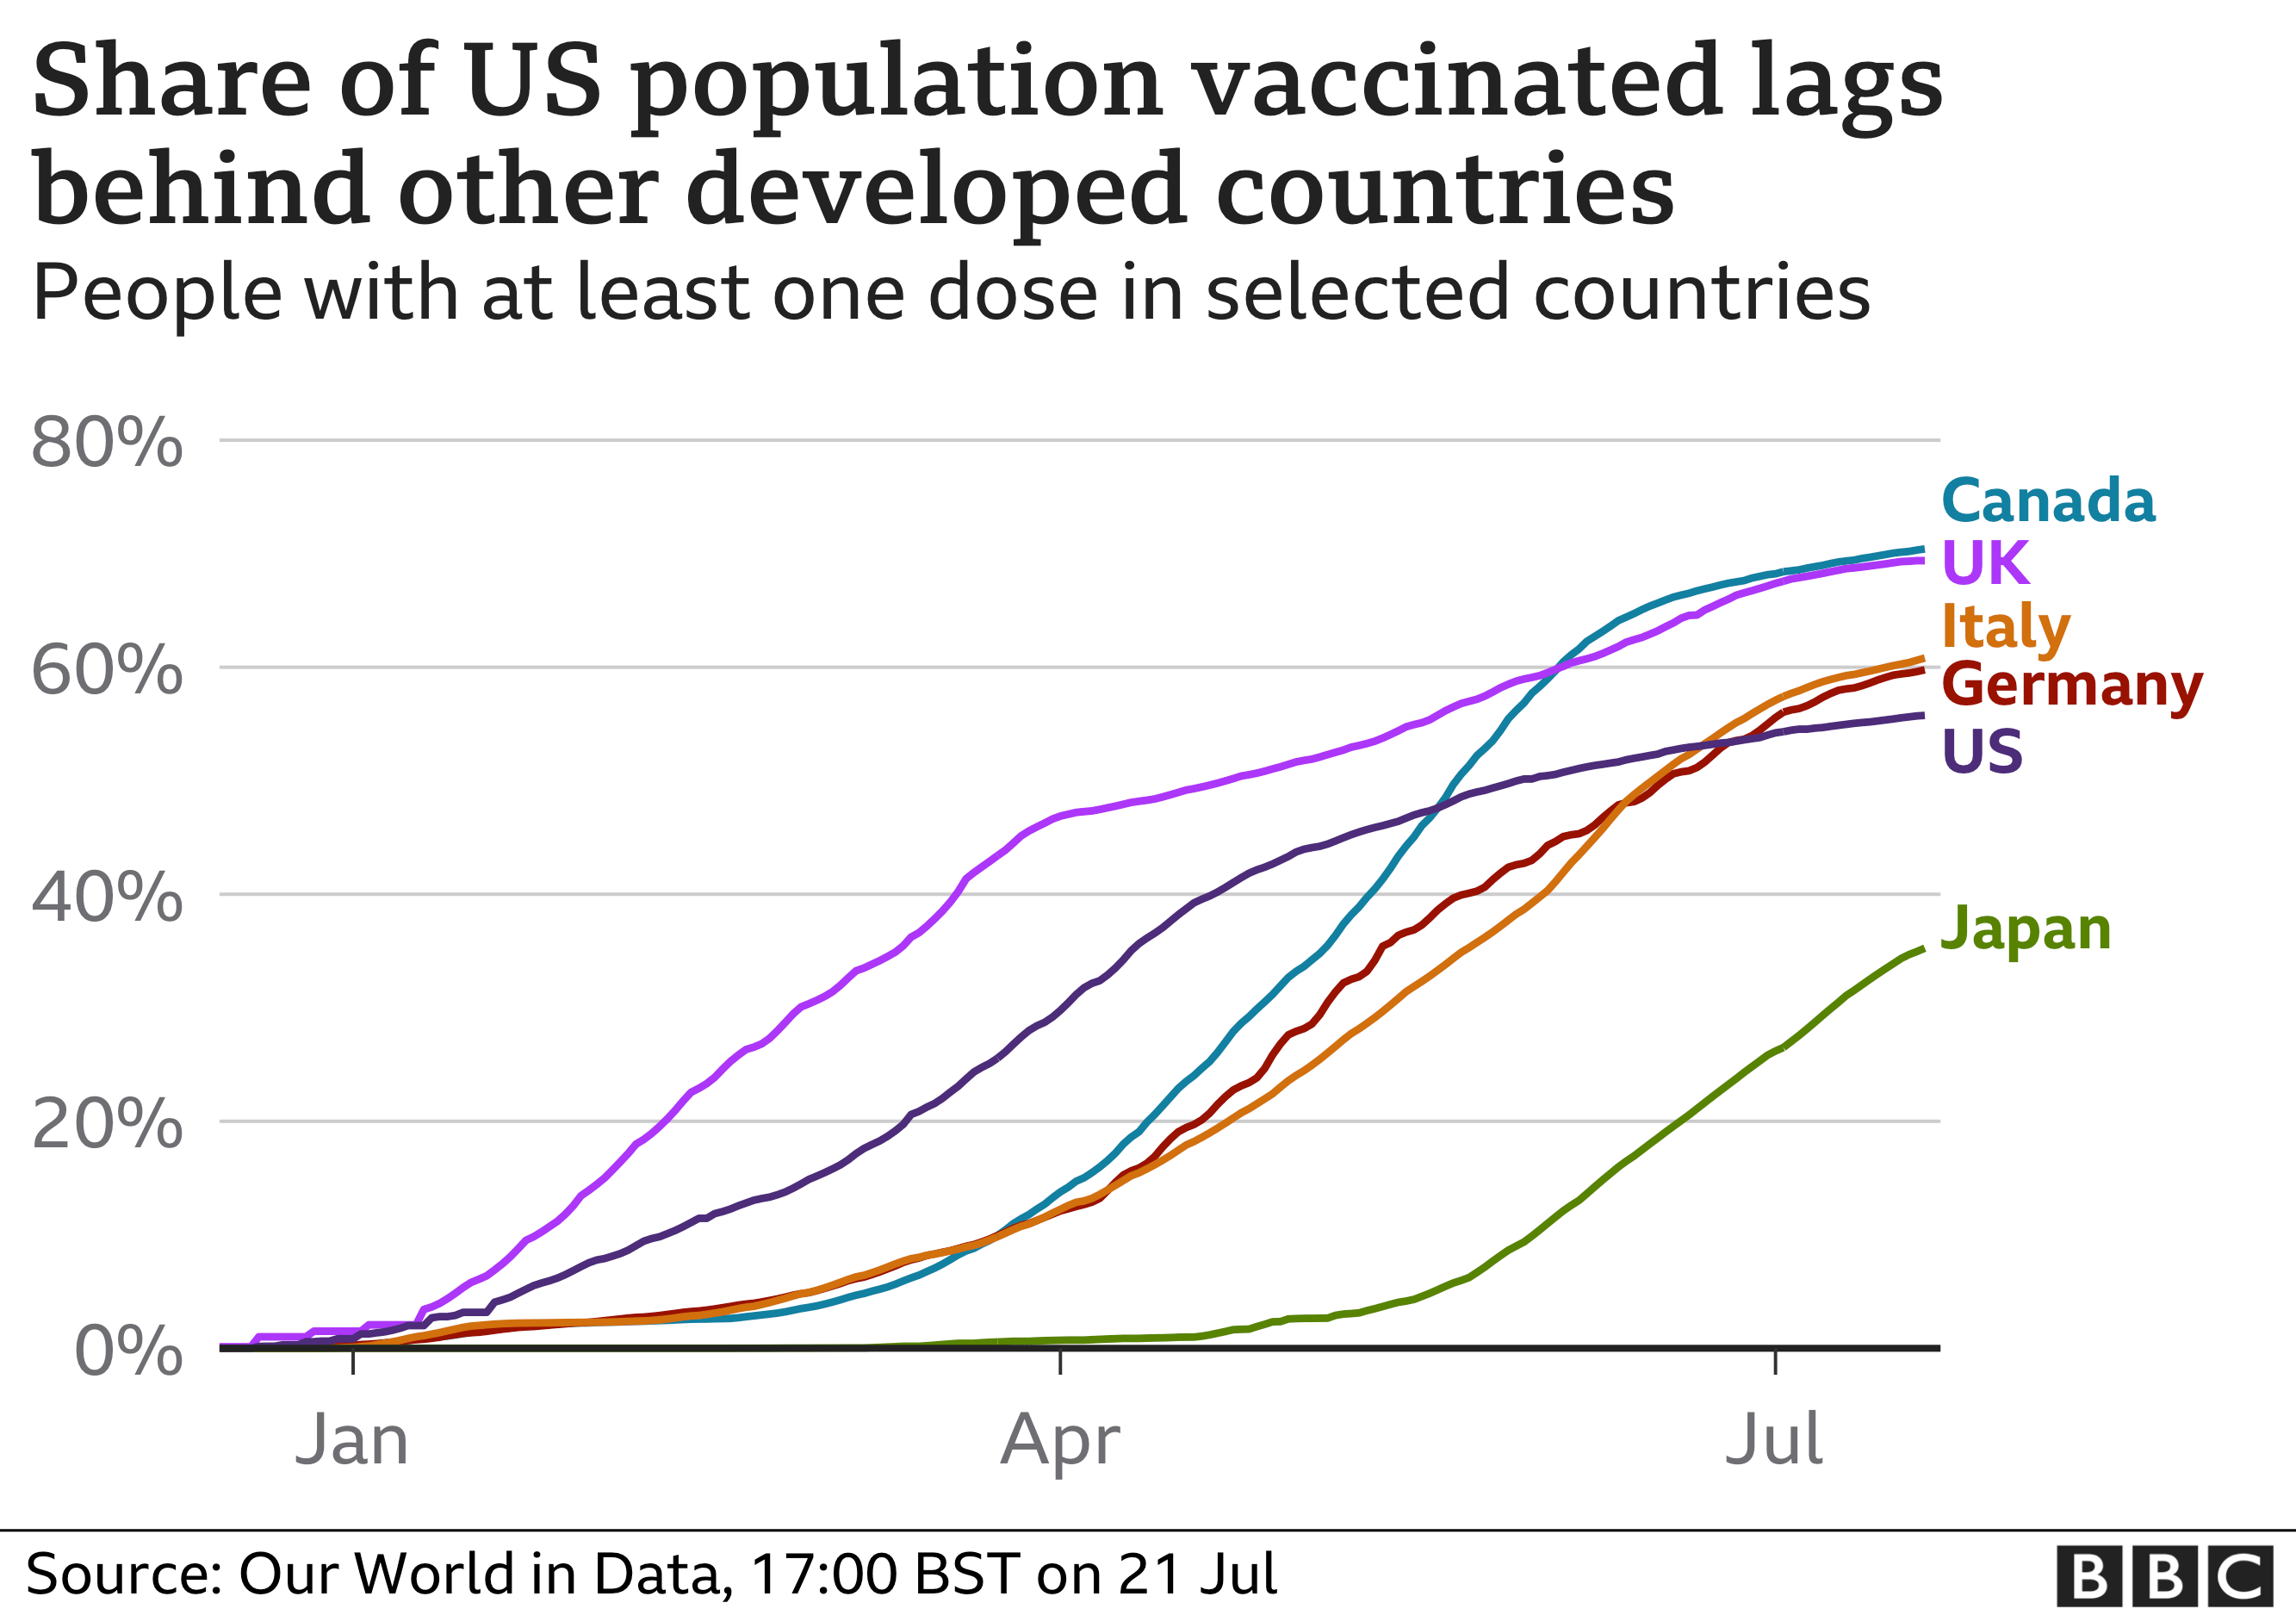 Vaccinations in selected countries